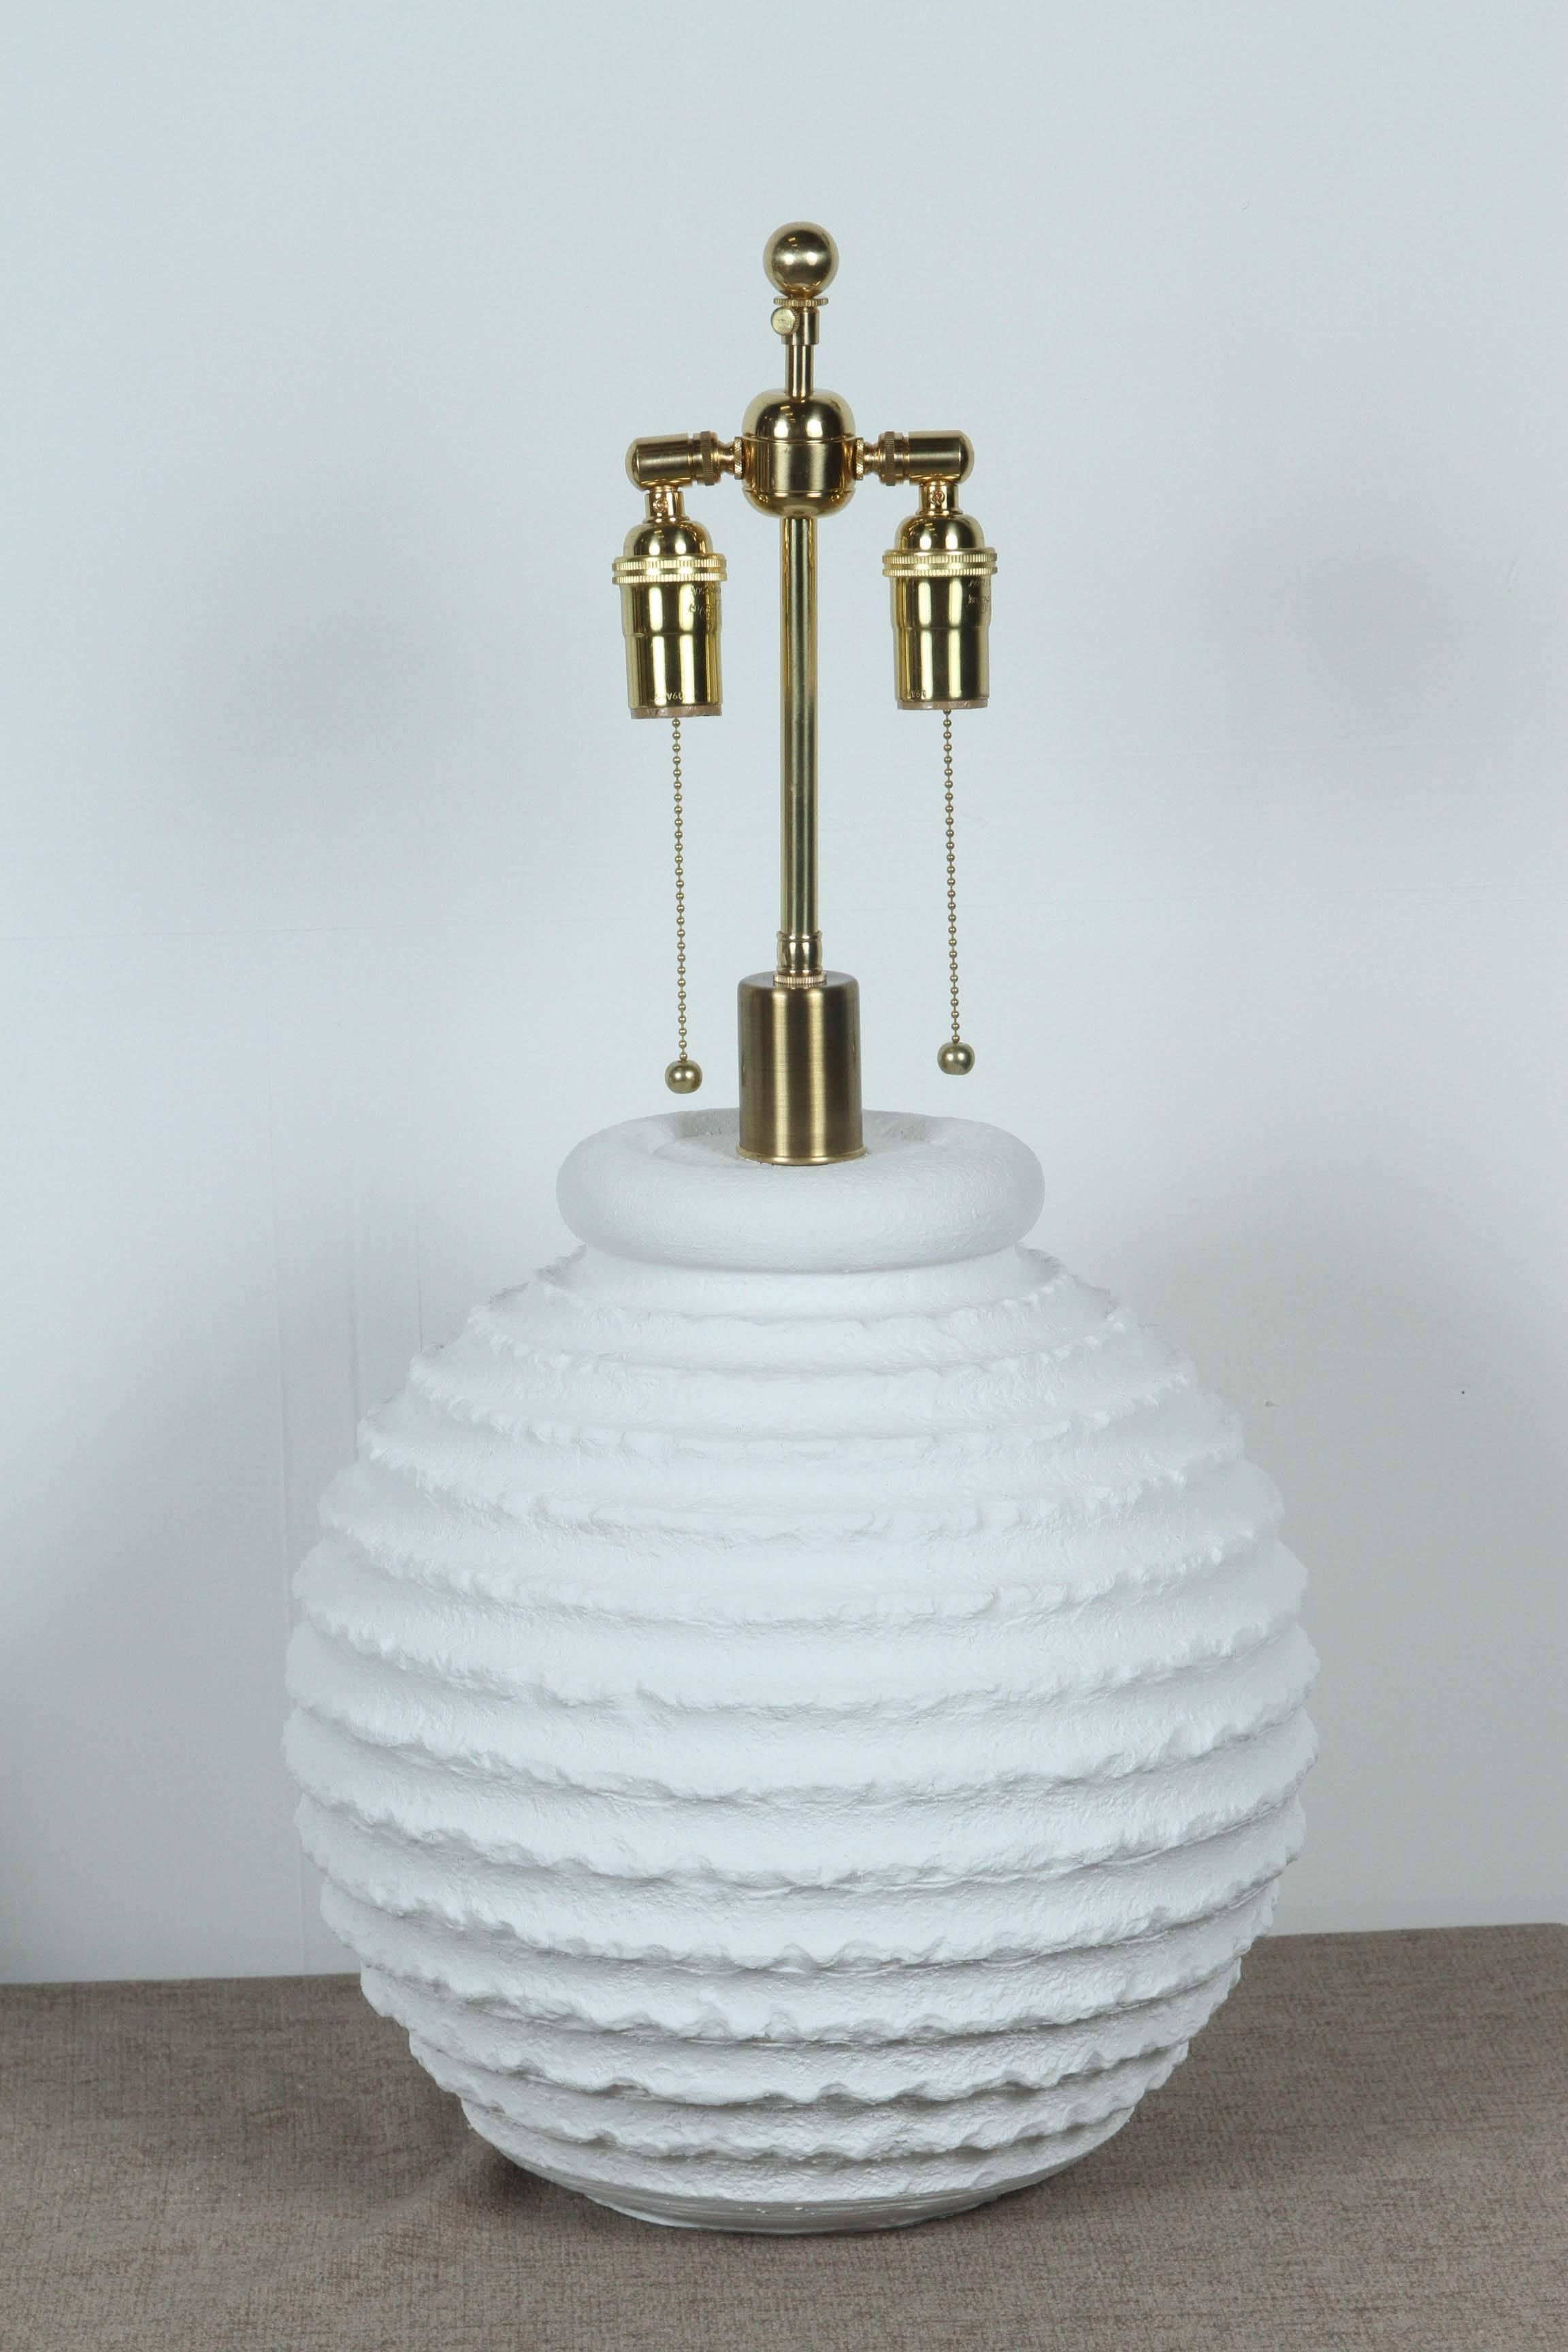 Pair of molded plaster table lamps with a flat white matte finish. 
The lamps have been newly rewired with polished brass double clusters.